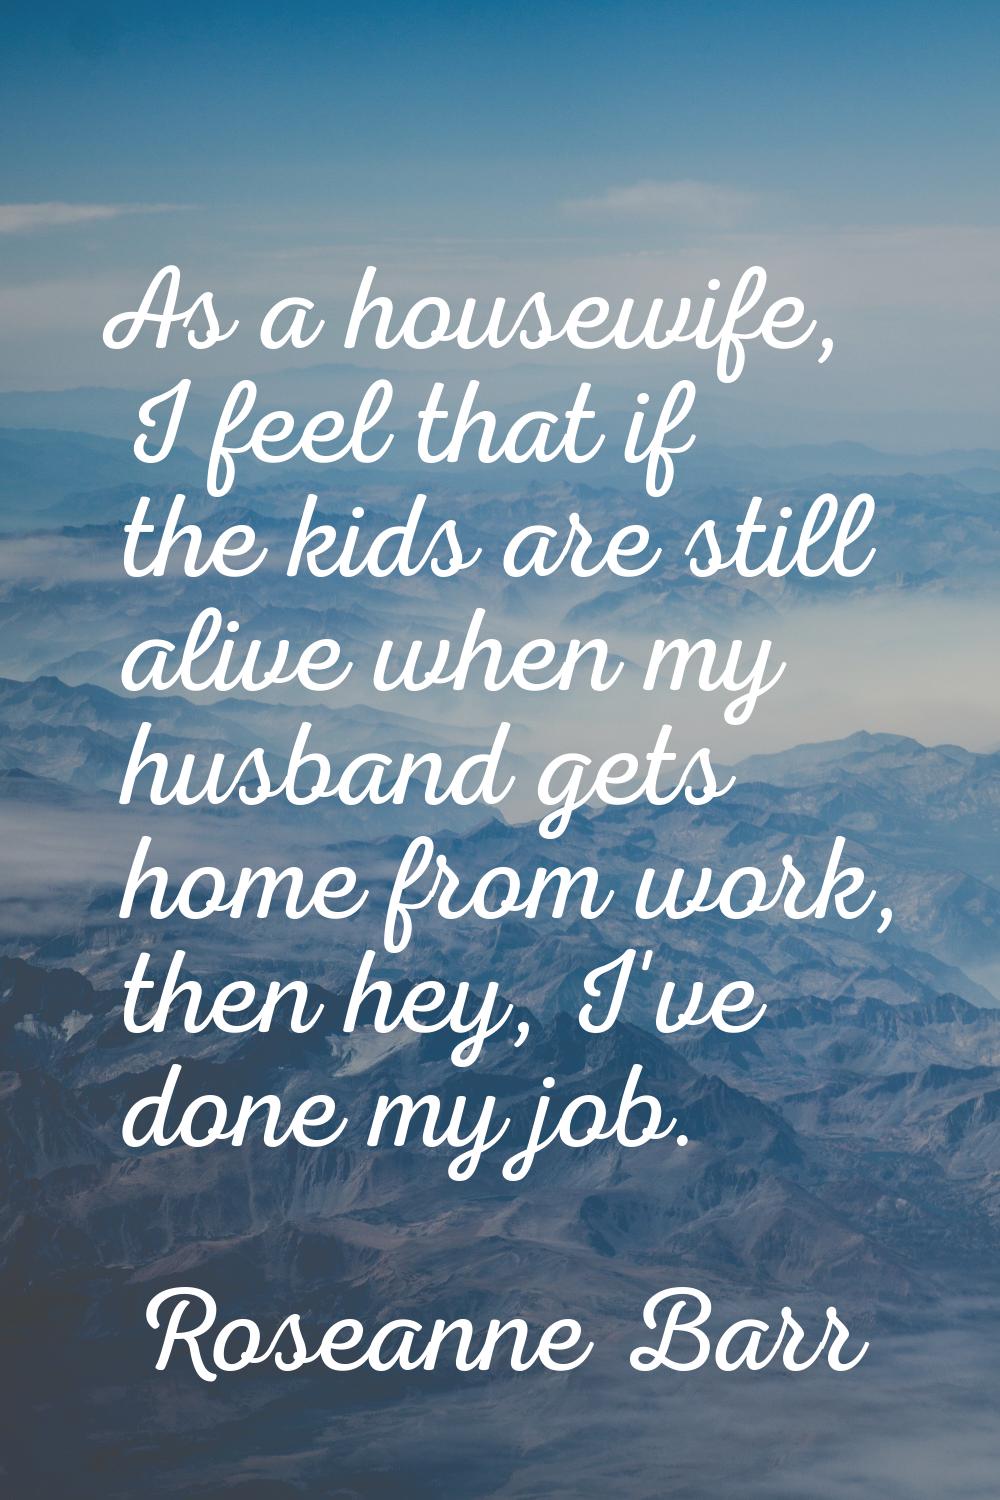 As a housewife, I feel that if the kids are still alive when my husband gets home from work, then h